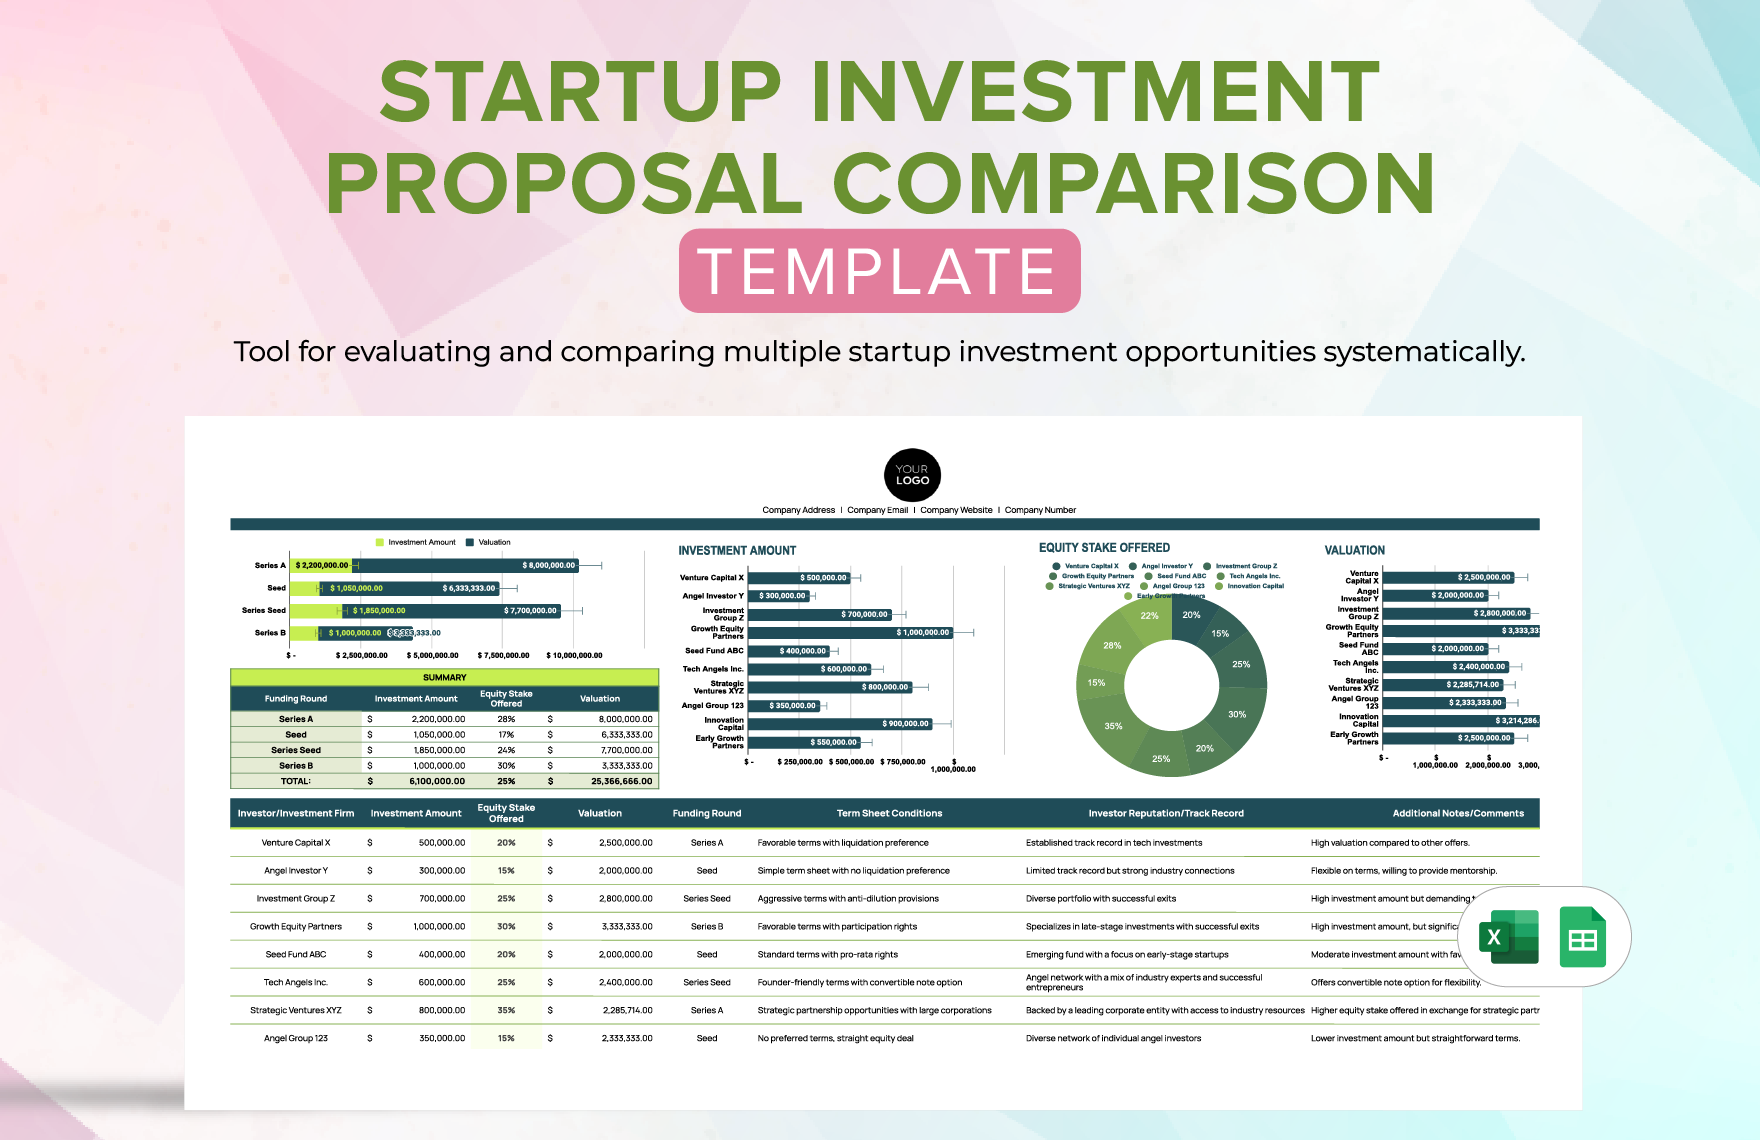 Startup Investment Proposal Comparison Template in Excel, Google Sheets